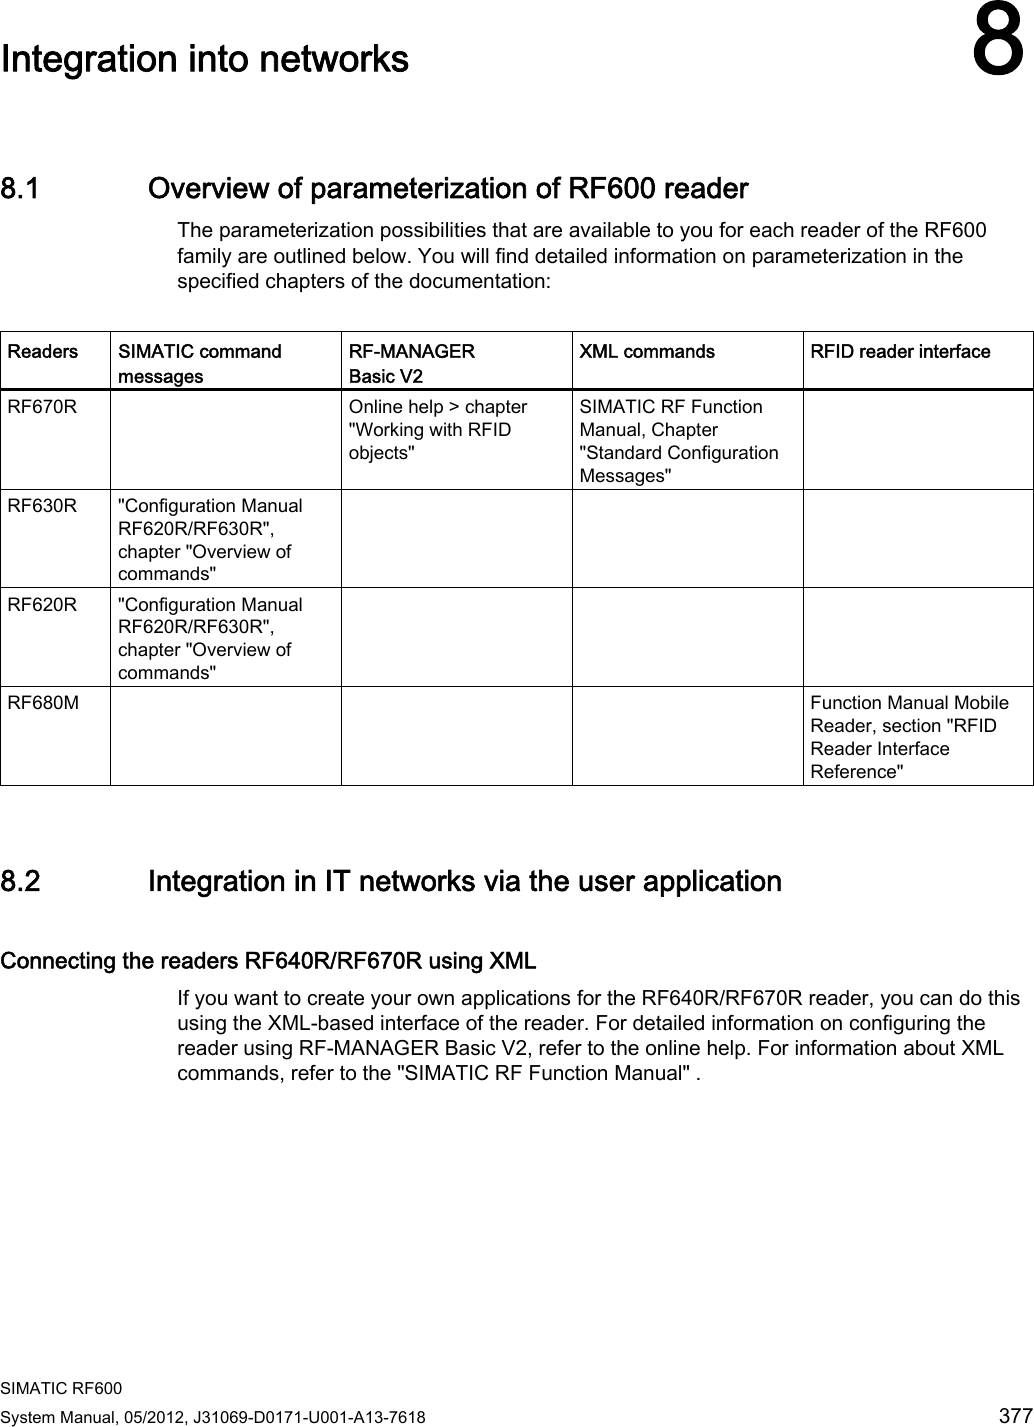  SIMATIC RF600 System Manual, 05/2012, J31069-D0171-U001-A13-7618  377 Integration into networks 88.1 Overview of parameterization of RF600 reader The parameterization possibilities that are available to you for each reader of the RF600 family are outlined below. You will find detailed information on parameterization in the specified chapters of the documentation:  Readers  SIMATIC command messages RF-MANAGER Basic V2 XML commands  RFID reader interface RF670R    Online help &gt; chapter &quot;Working with RFID objects&quot; SIMATIC RF Function Manual, Chapter &quot;Standard Configuration Messages&quot;  RF630R  &quot;Configuration Manual RF620R/RF630R&quot;, chapter &quot;Overview of commands&quot;    RF620R  &quot;Configuration Manual RF620R/RF630R&quot;, chapter &quot;Overview of commands&quot;    RF680M     Function Manual Mobile Reader, section &quot;RFID Reader Interface Reference&quot; 8.2 Integration in IT networks via the user application Connecting the readers RF640R/RF670R using XML If you want to create your own applications for the RF640R/RF670R reader, you can do this using the XML-based interface of the reader. For detailed information on configuring the reader using RF-MANAGER Basic V2, refer to the online help. For information about XML commands, refer to the &quot;SIMATIC RF Function Manual&quot; .  